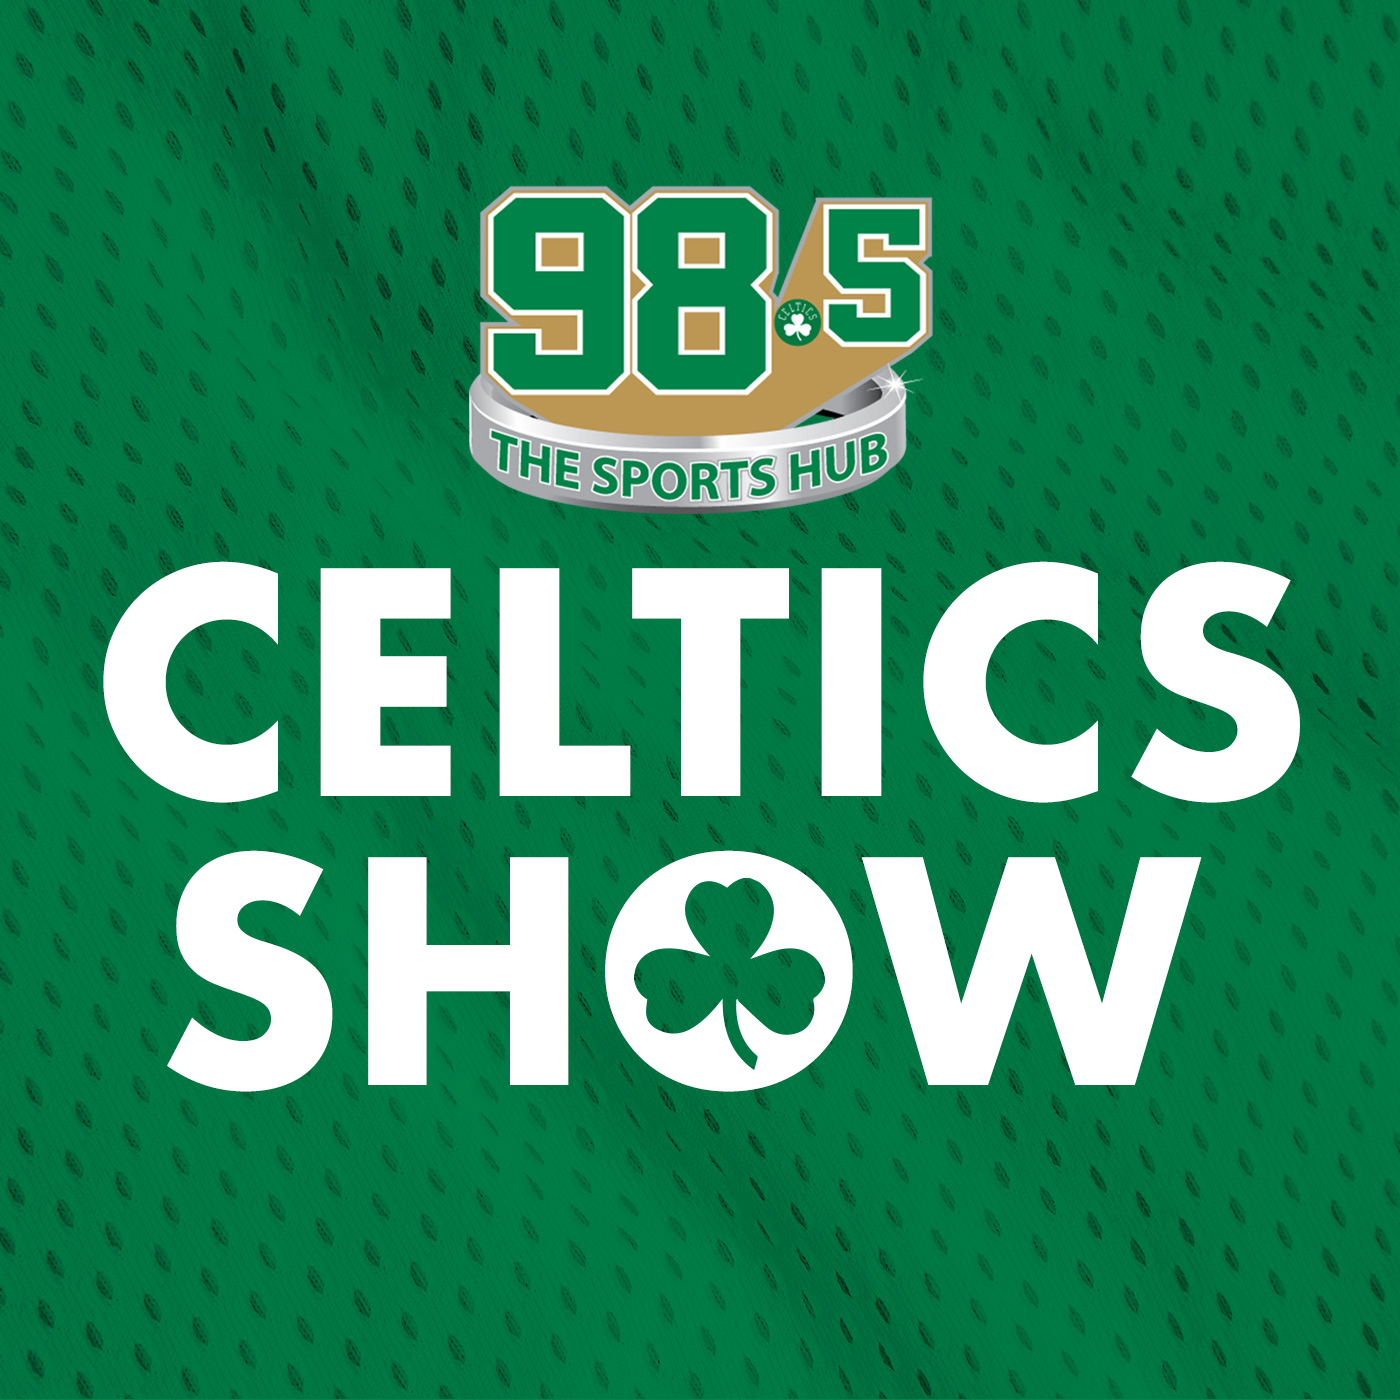 Celtics fall to Nuggets // Chris Forsberg calls in // crunch time concerns